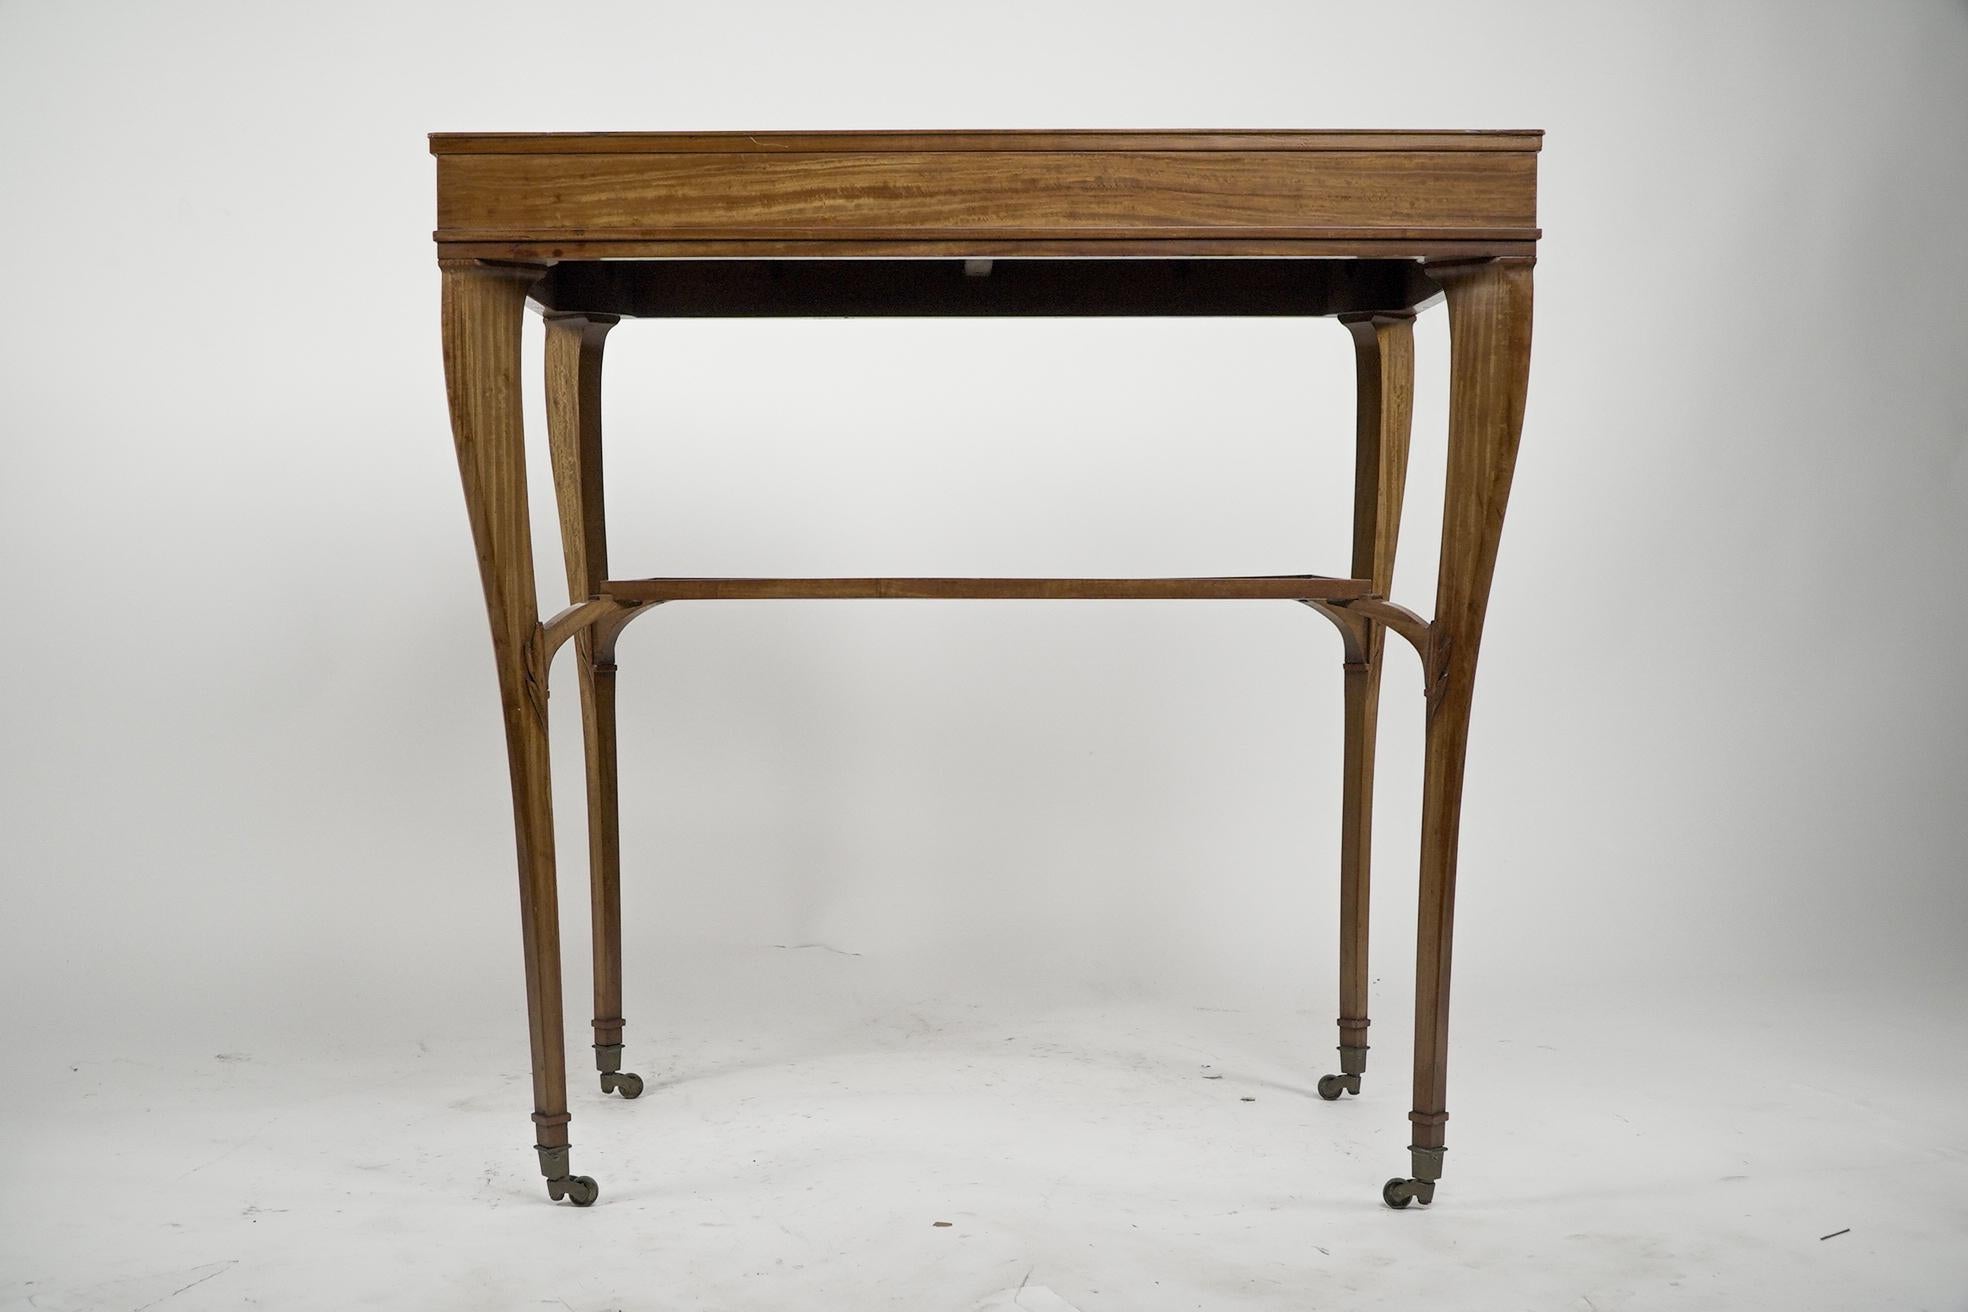 English A H Mackmurdo for E Goodall. A rare early Art Nouveau Satinwood side table For Sale